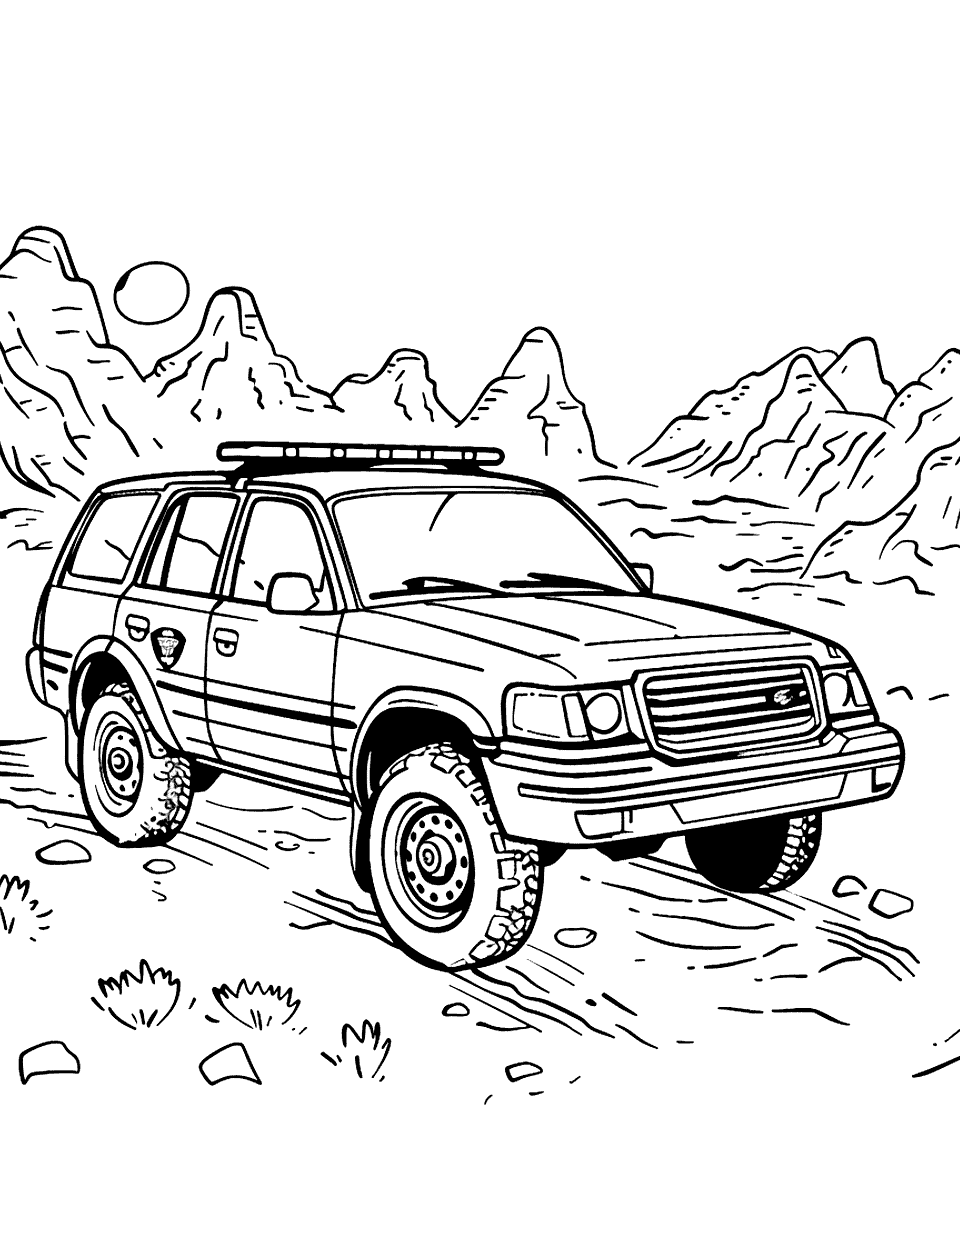 Off-Road Police Adventure Car Coloring Page - A police SUV driving through rough terrain to reach a remote area.